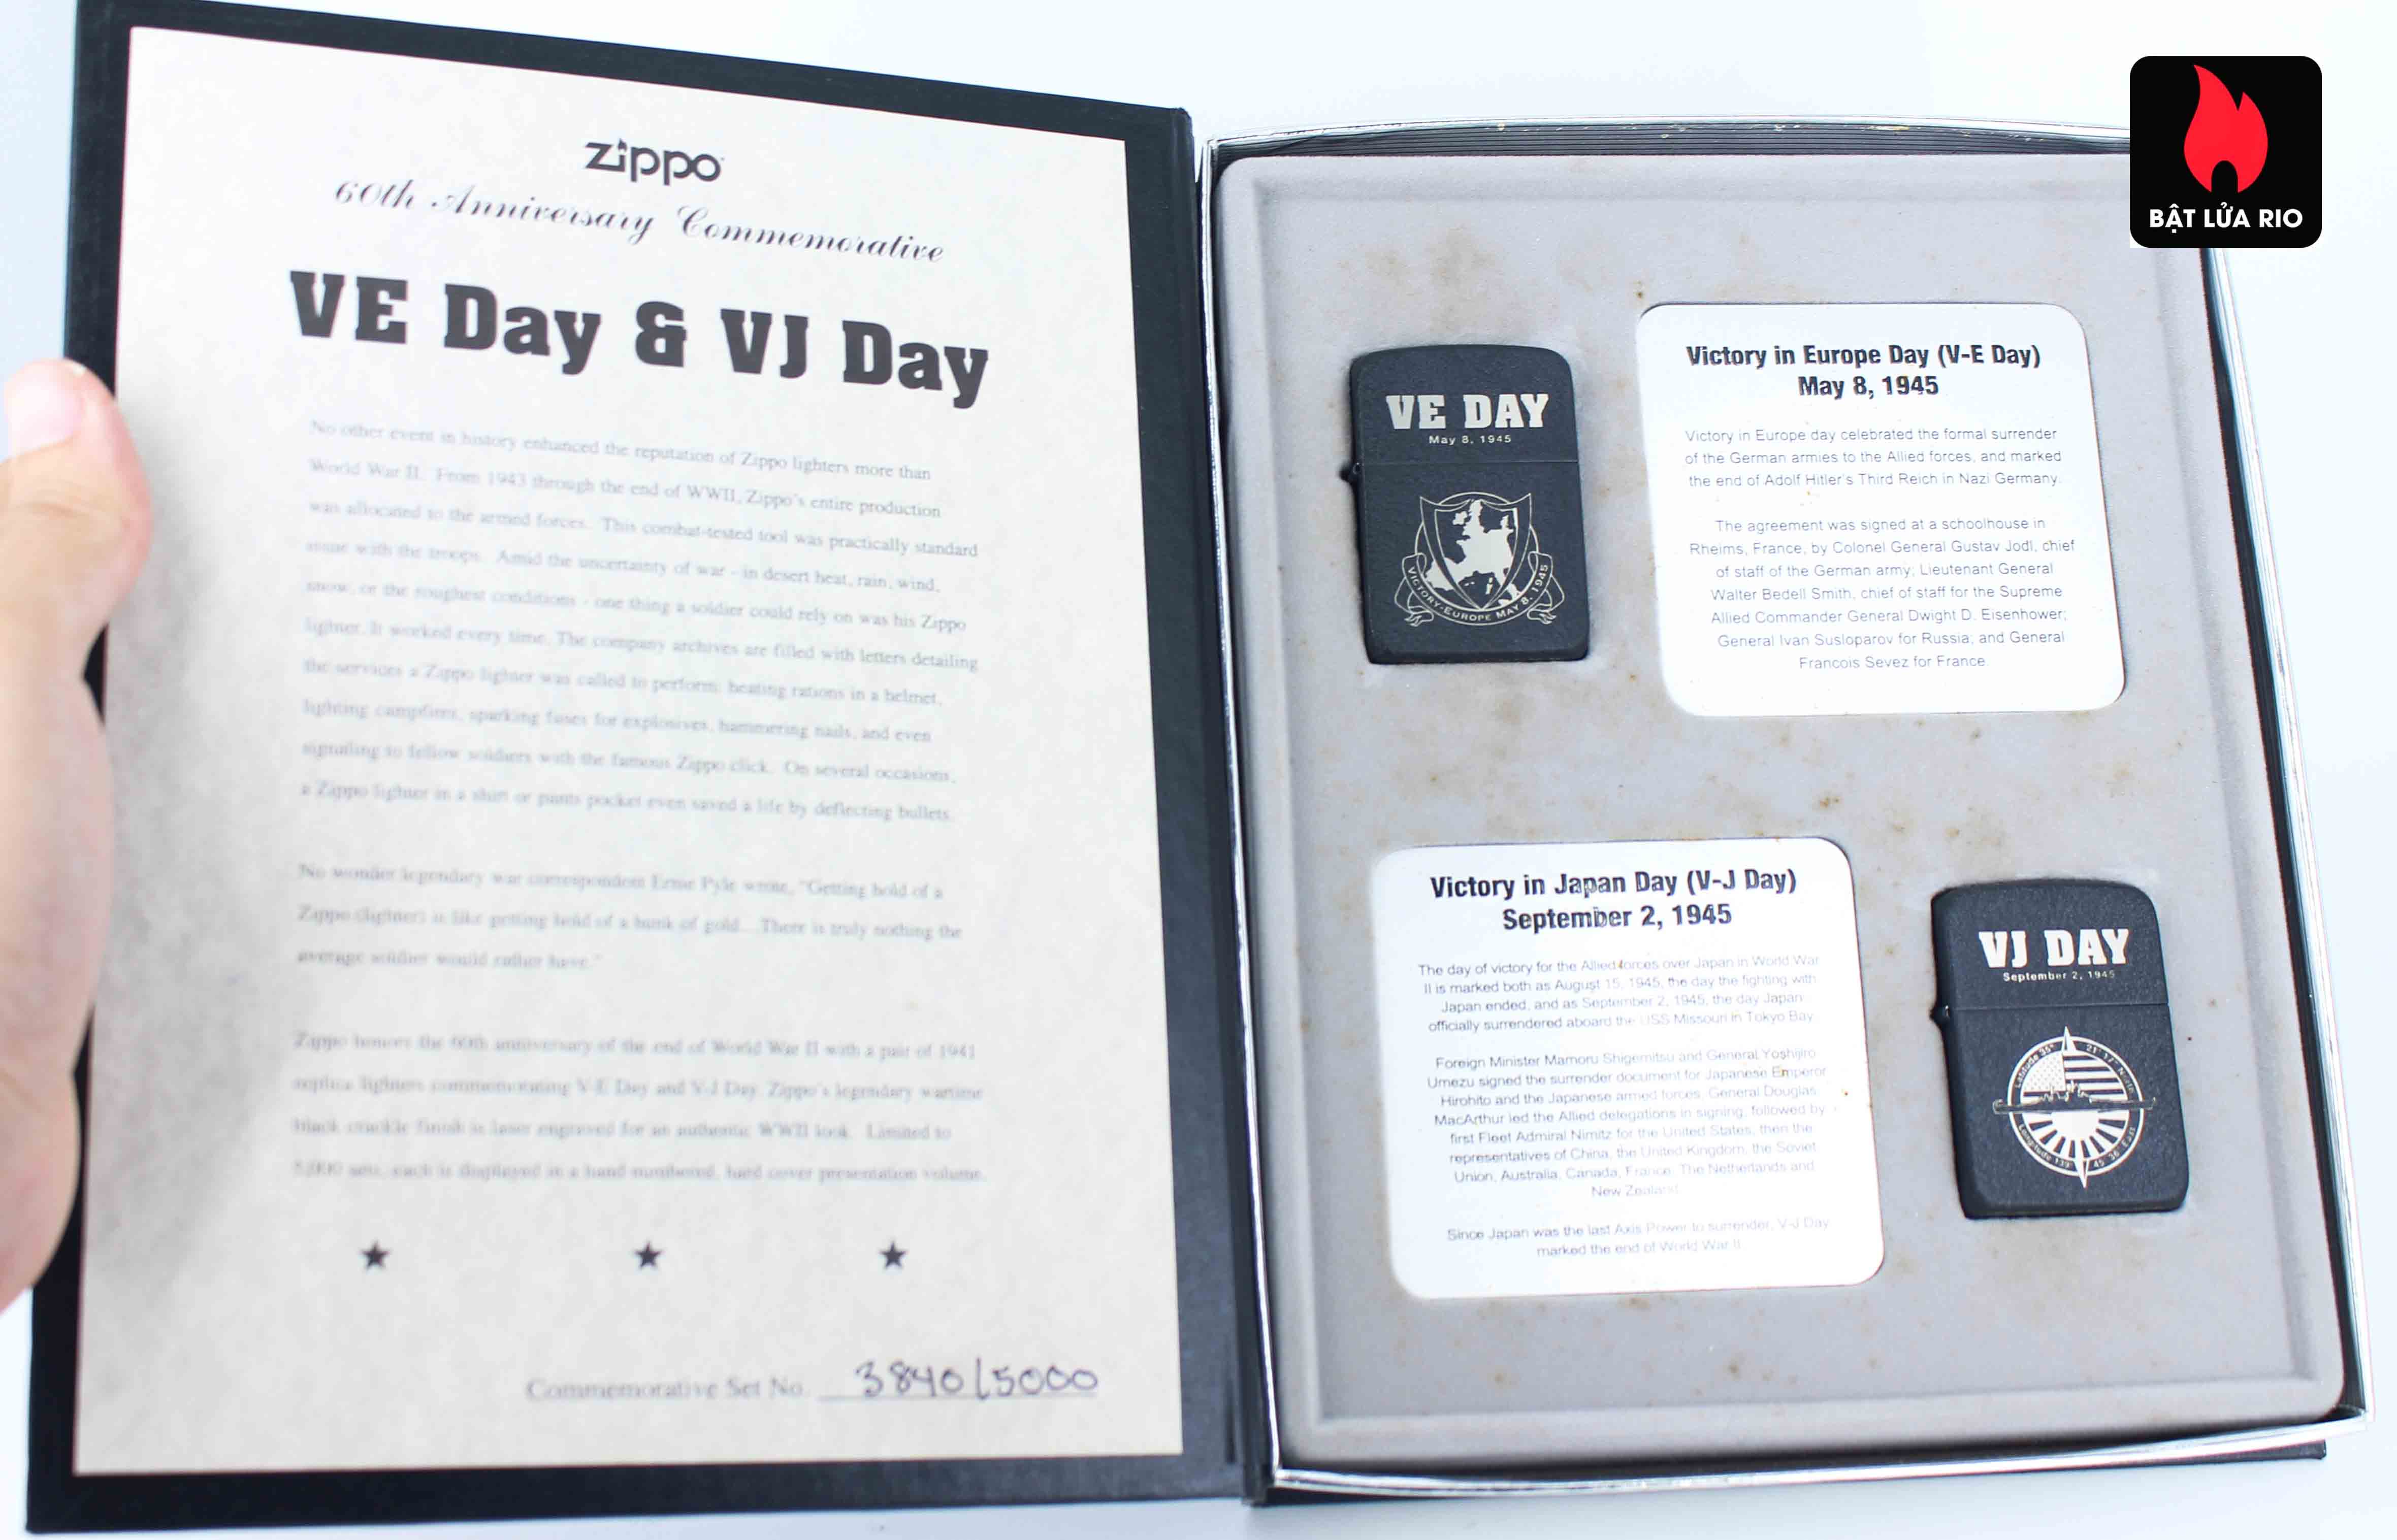 Zippo 2005 - WWII VE DAY & VJ DAY - Victory in Europe & Japan 1